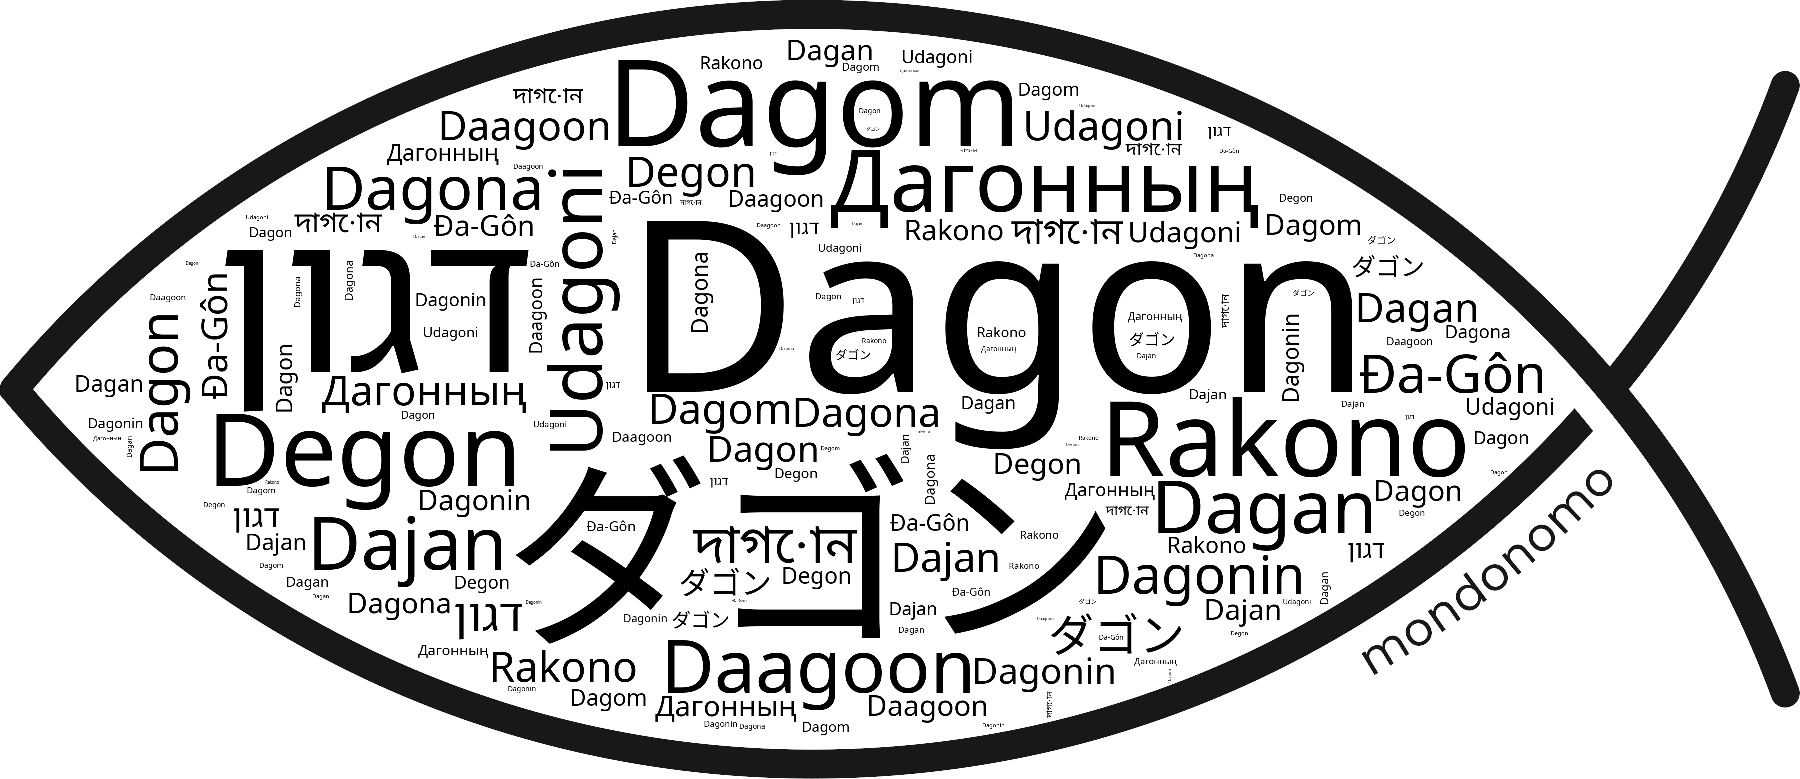 Name Dagon in the world's Bibles